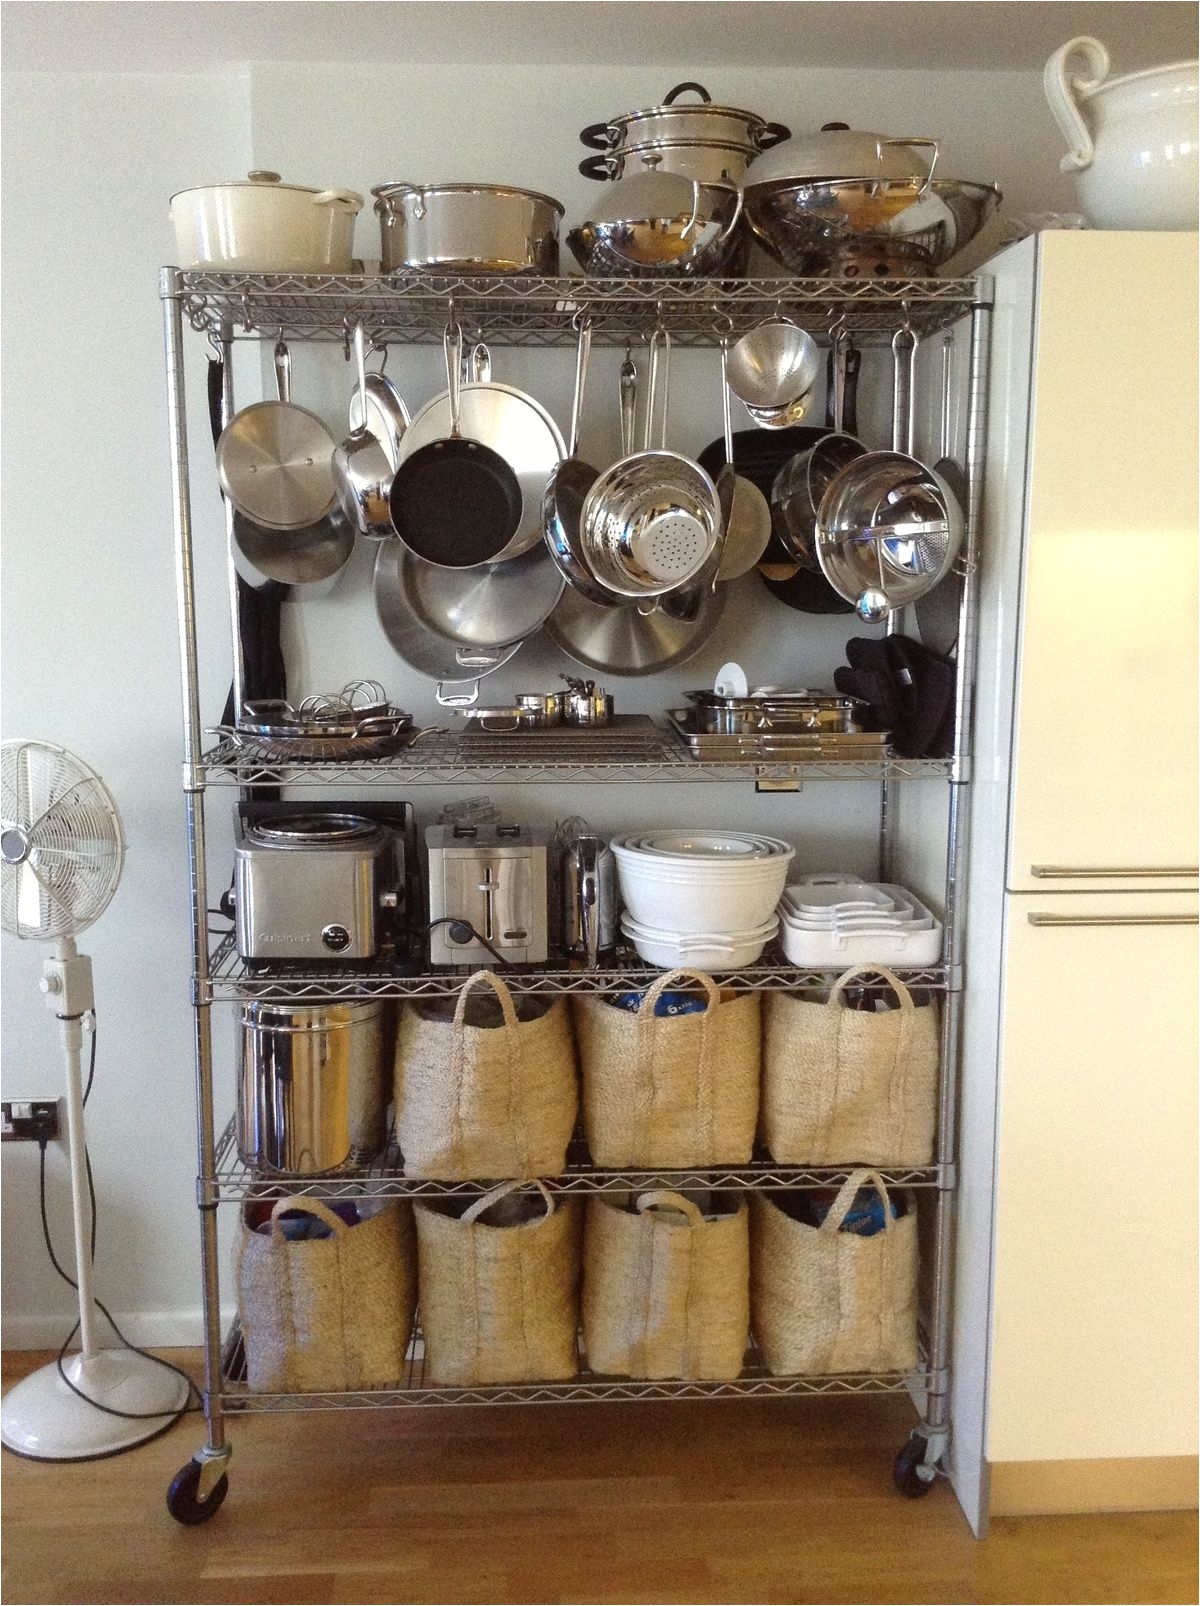 hang pots and pans from bakers rack